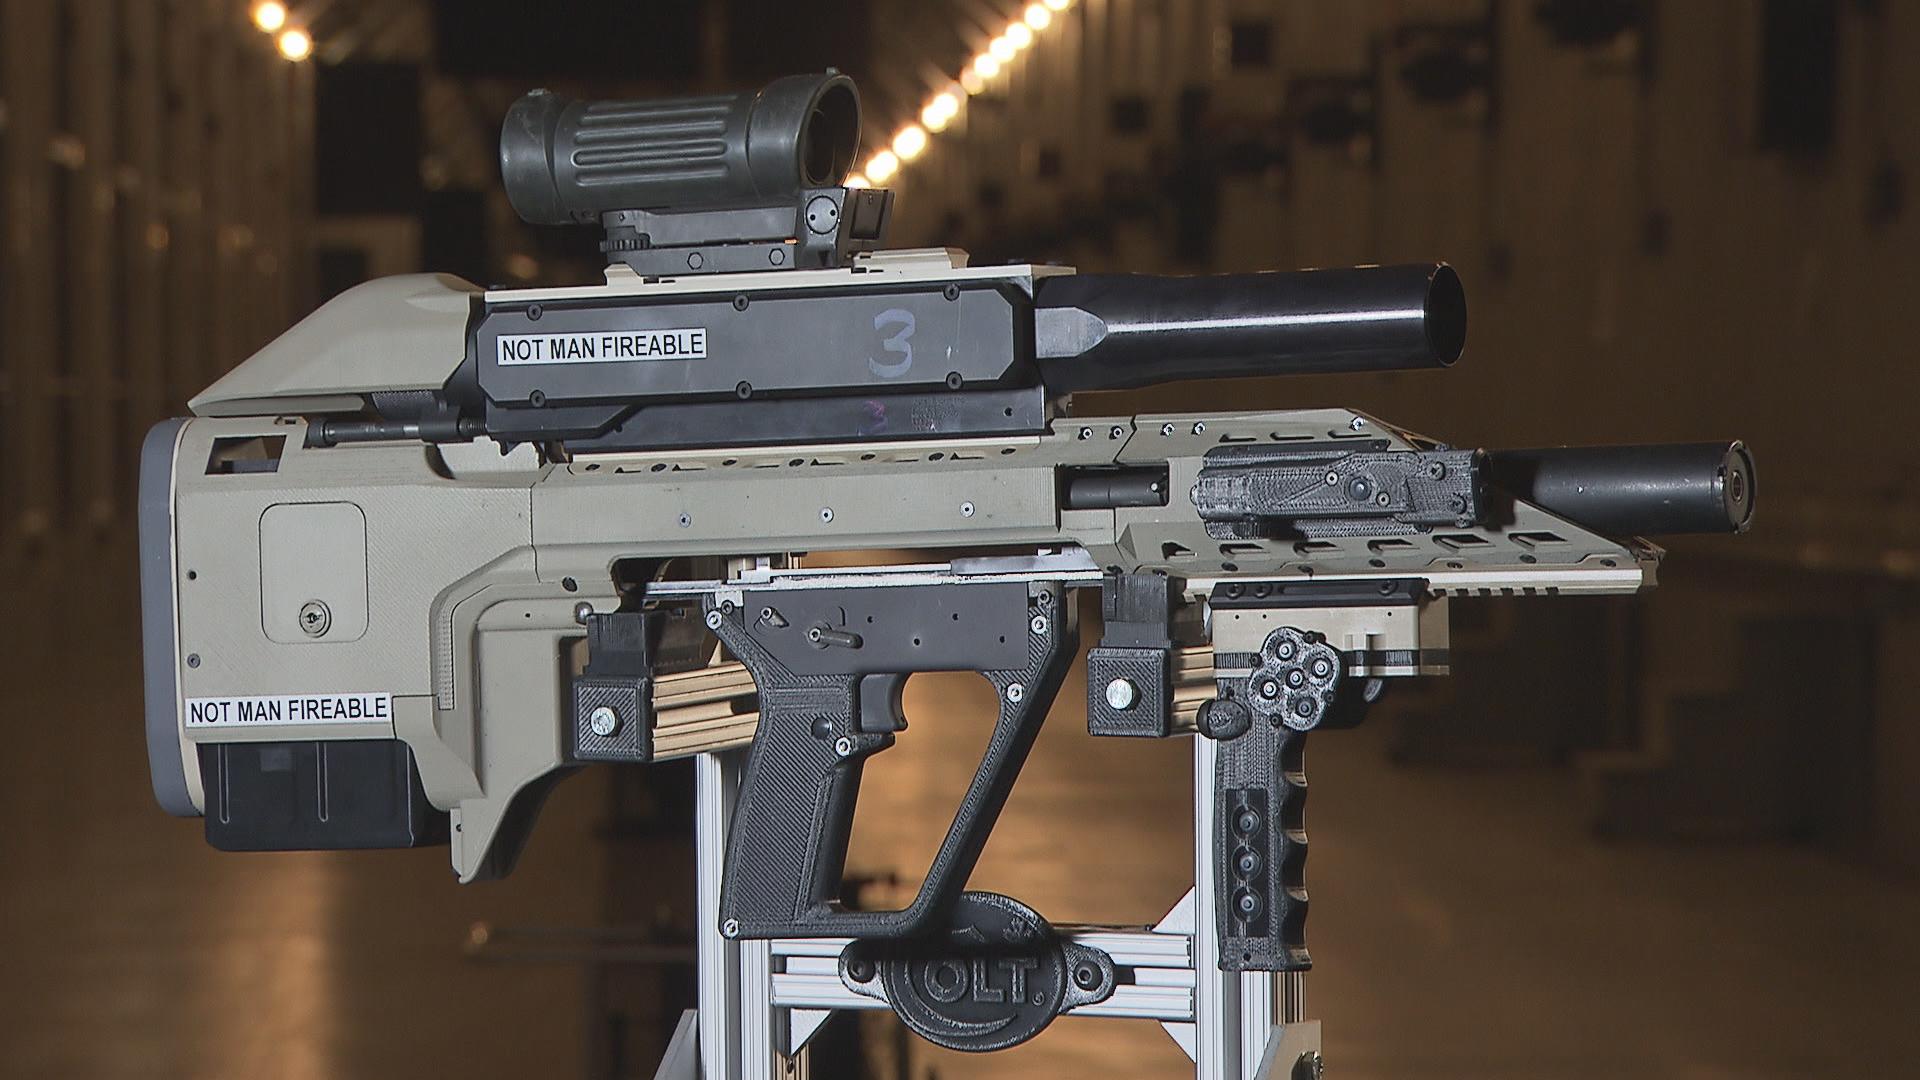 The most recent rifle prototype from 2014.